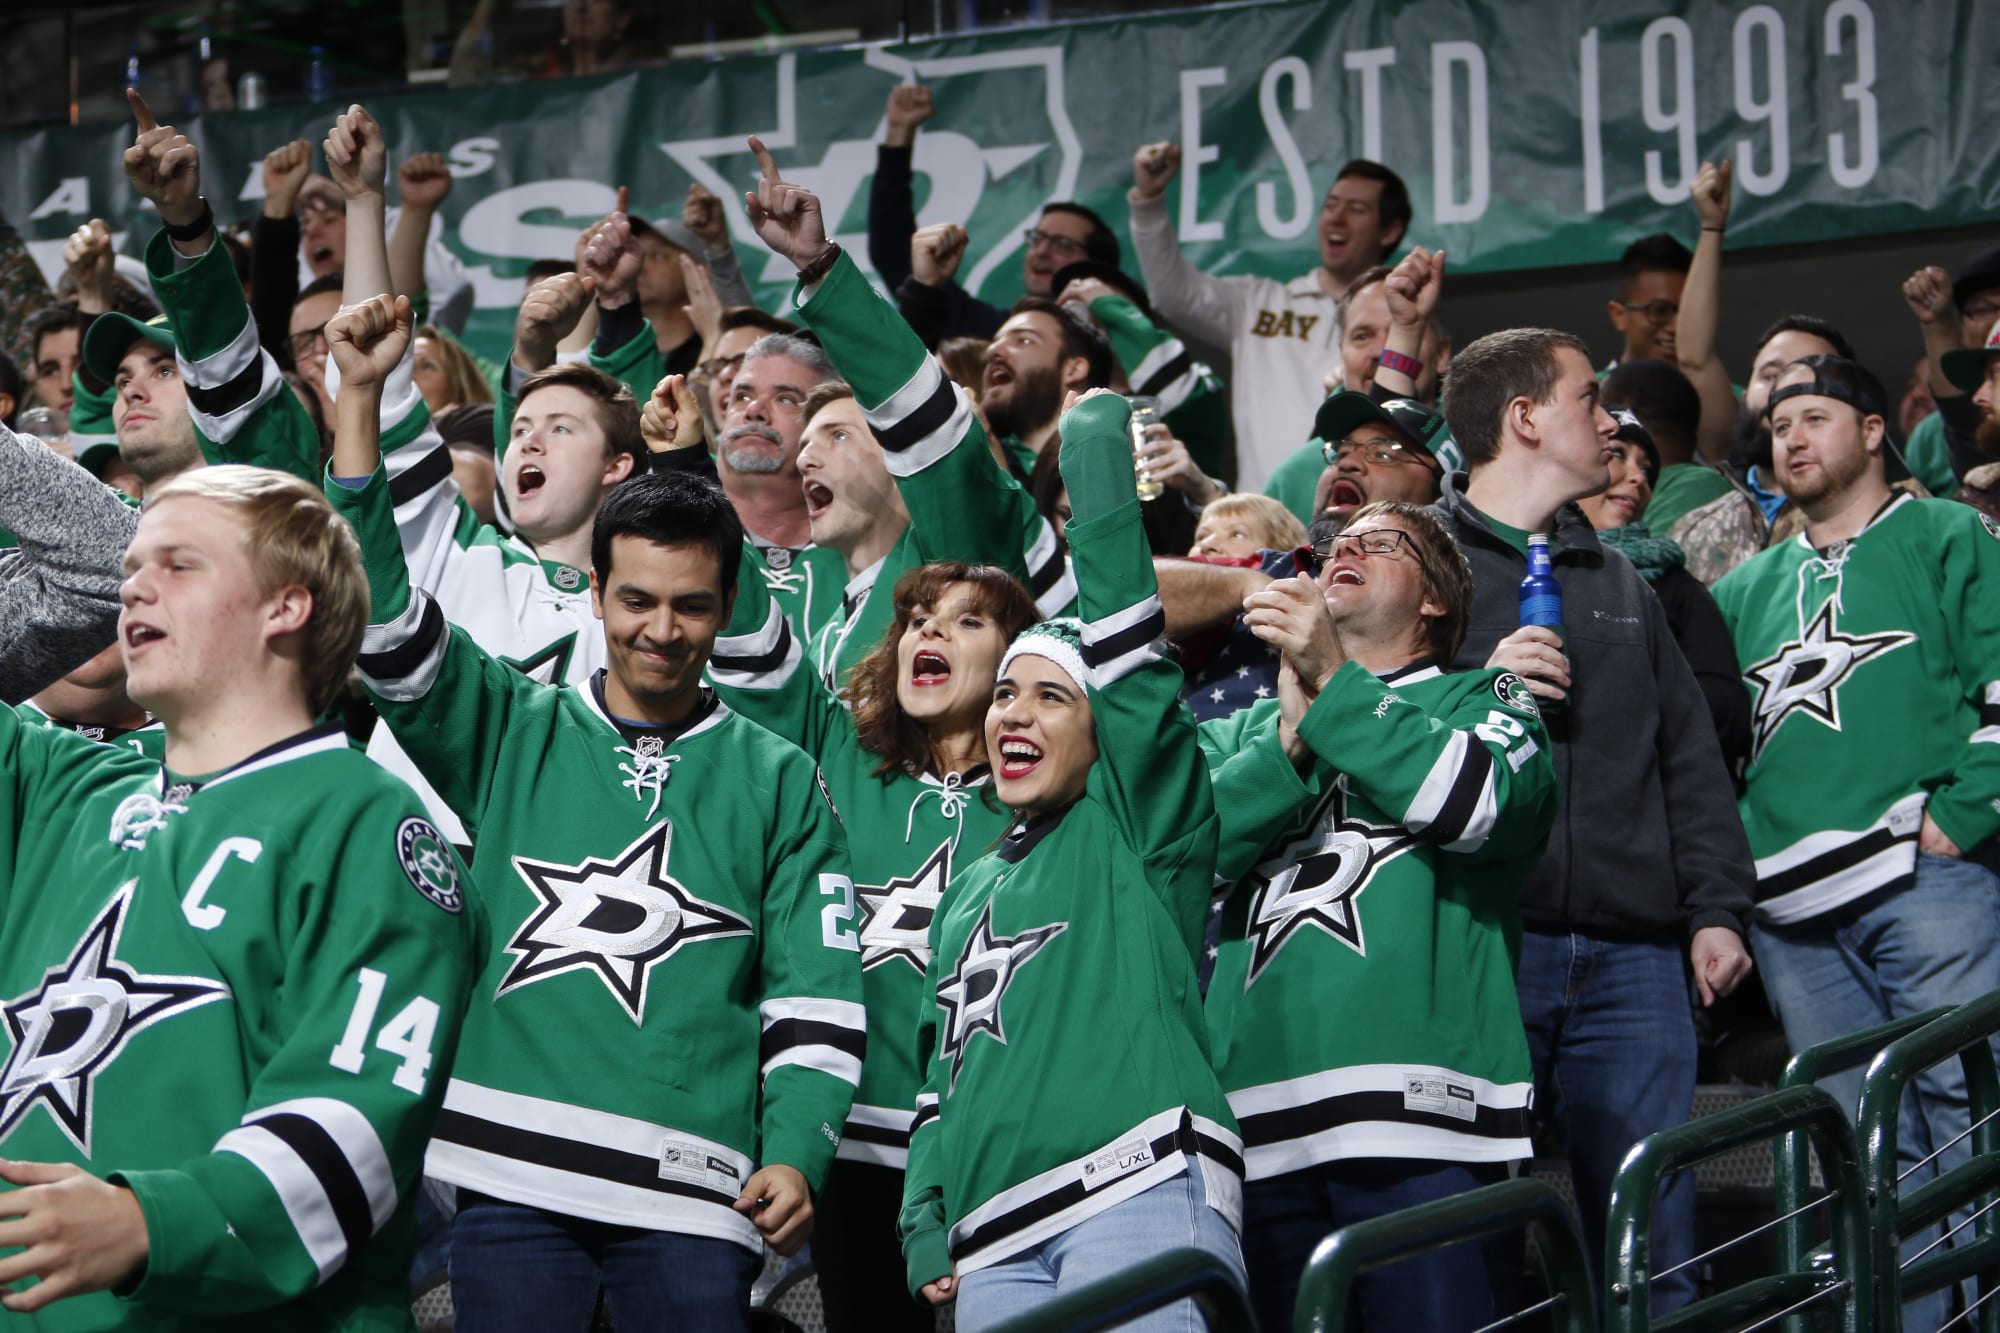 Dallas Stars Single Game Tickets For 201718 Season Now On Sale